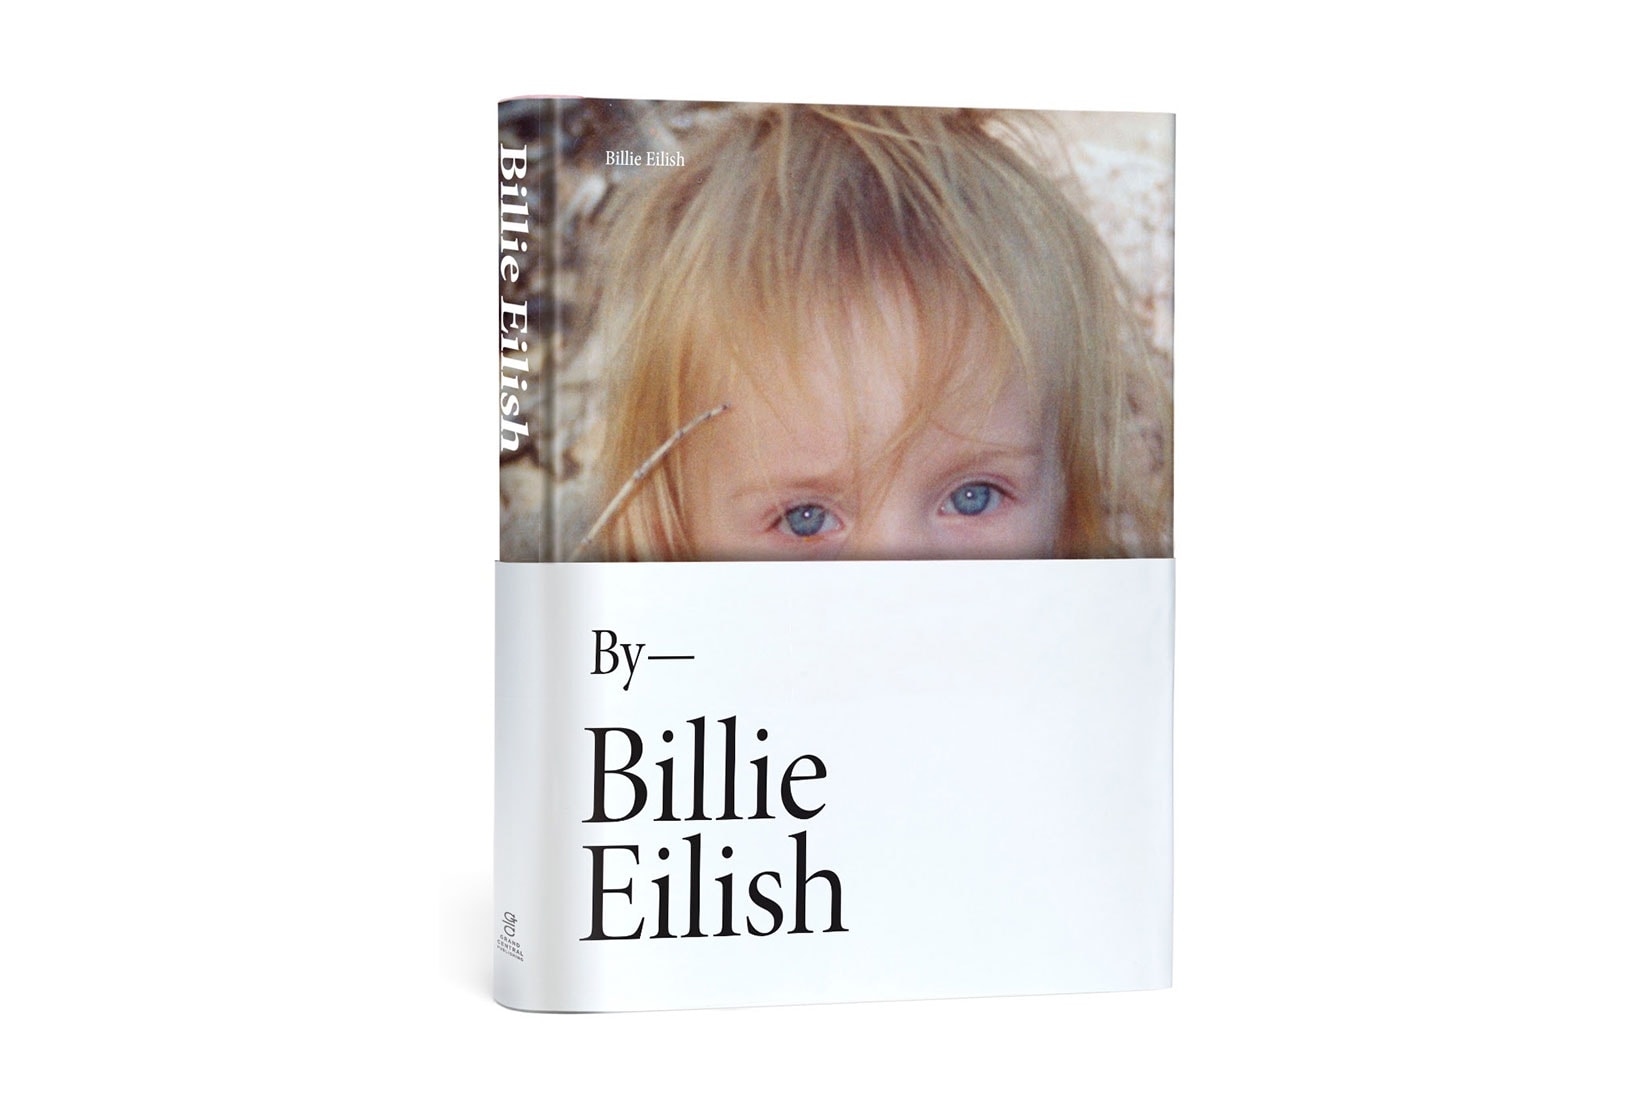 billie eilish photography book personal life career story launch